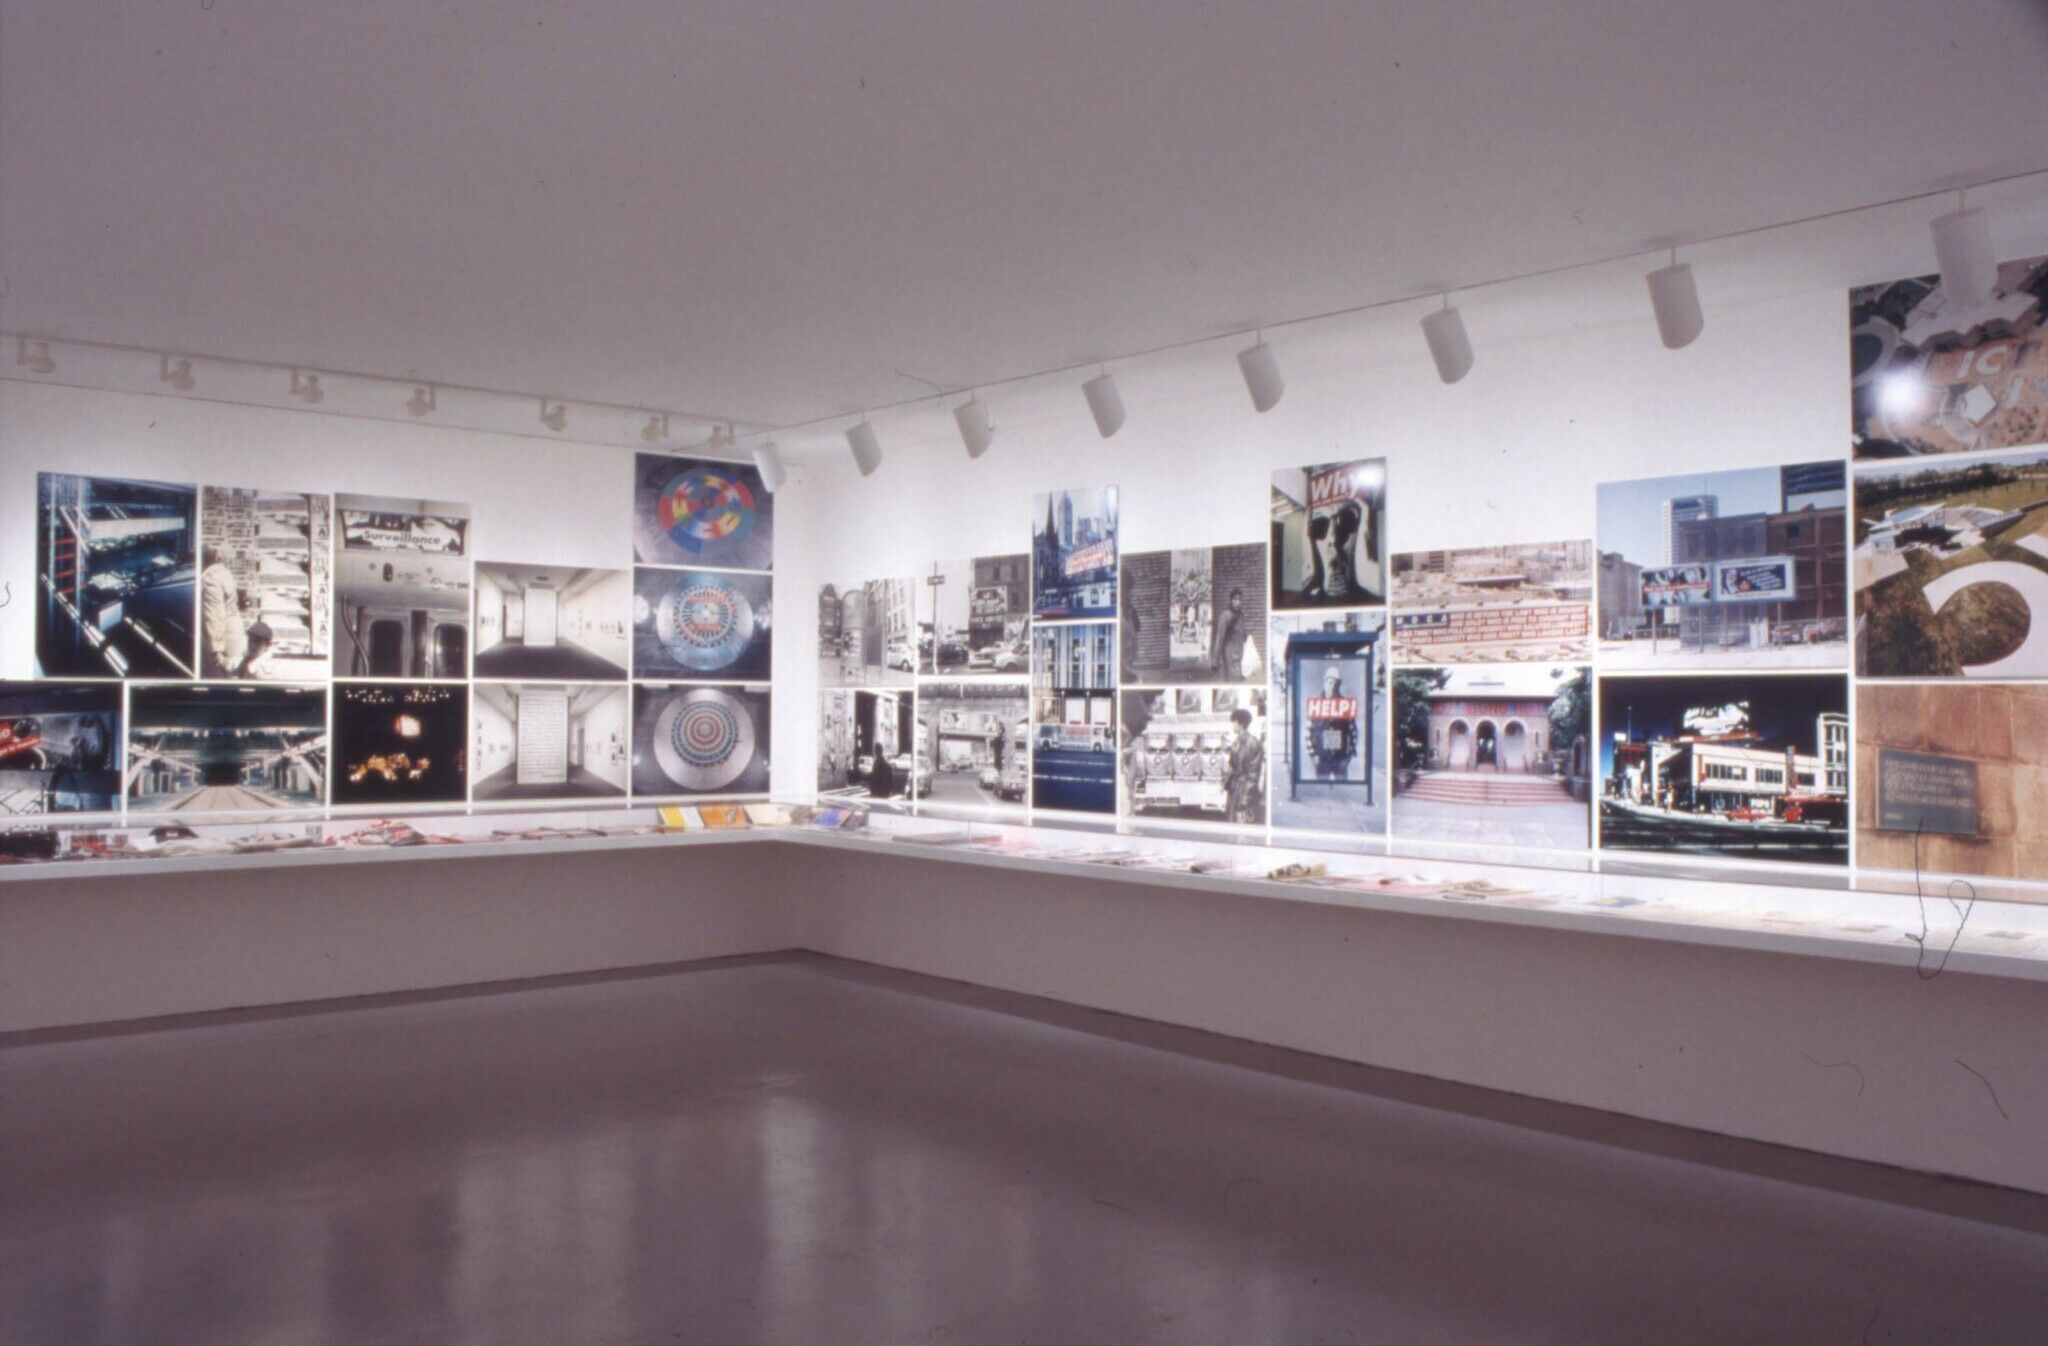 Gallery walls covered in photographs, along with display cases that run along the walls.